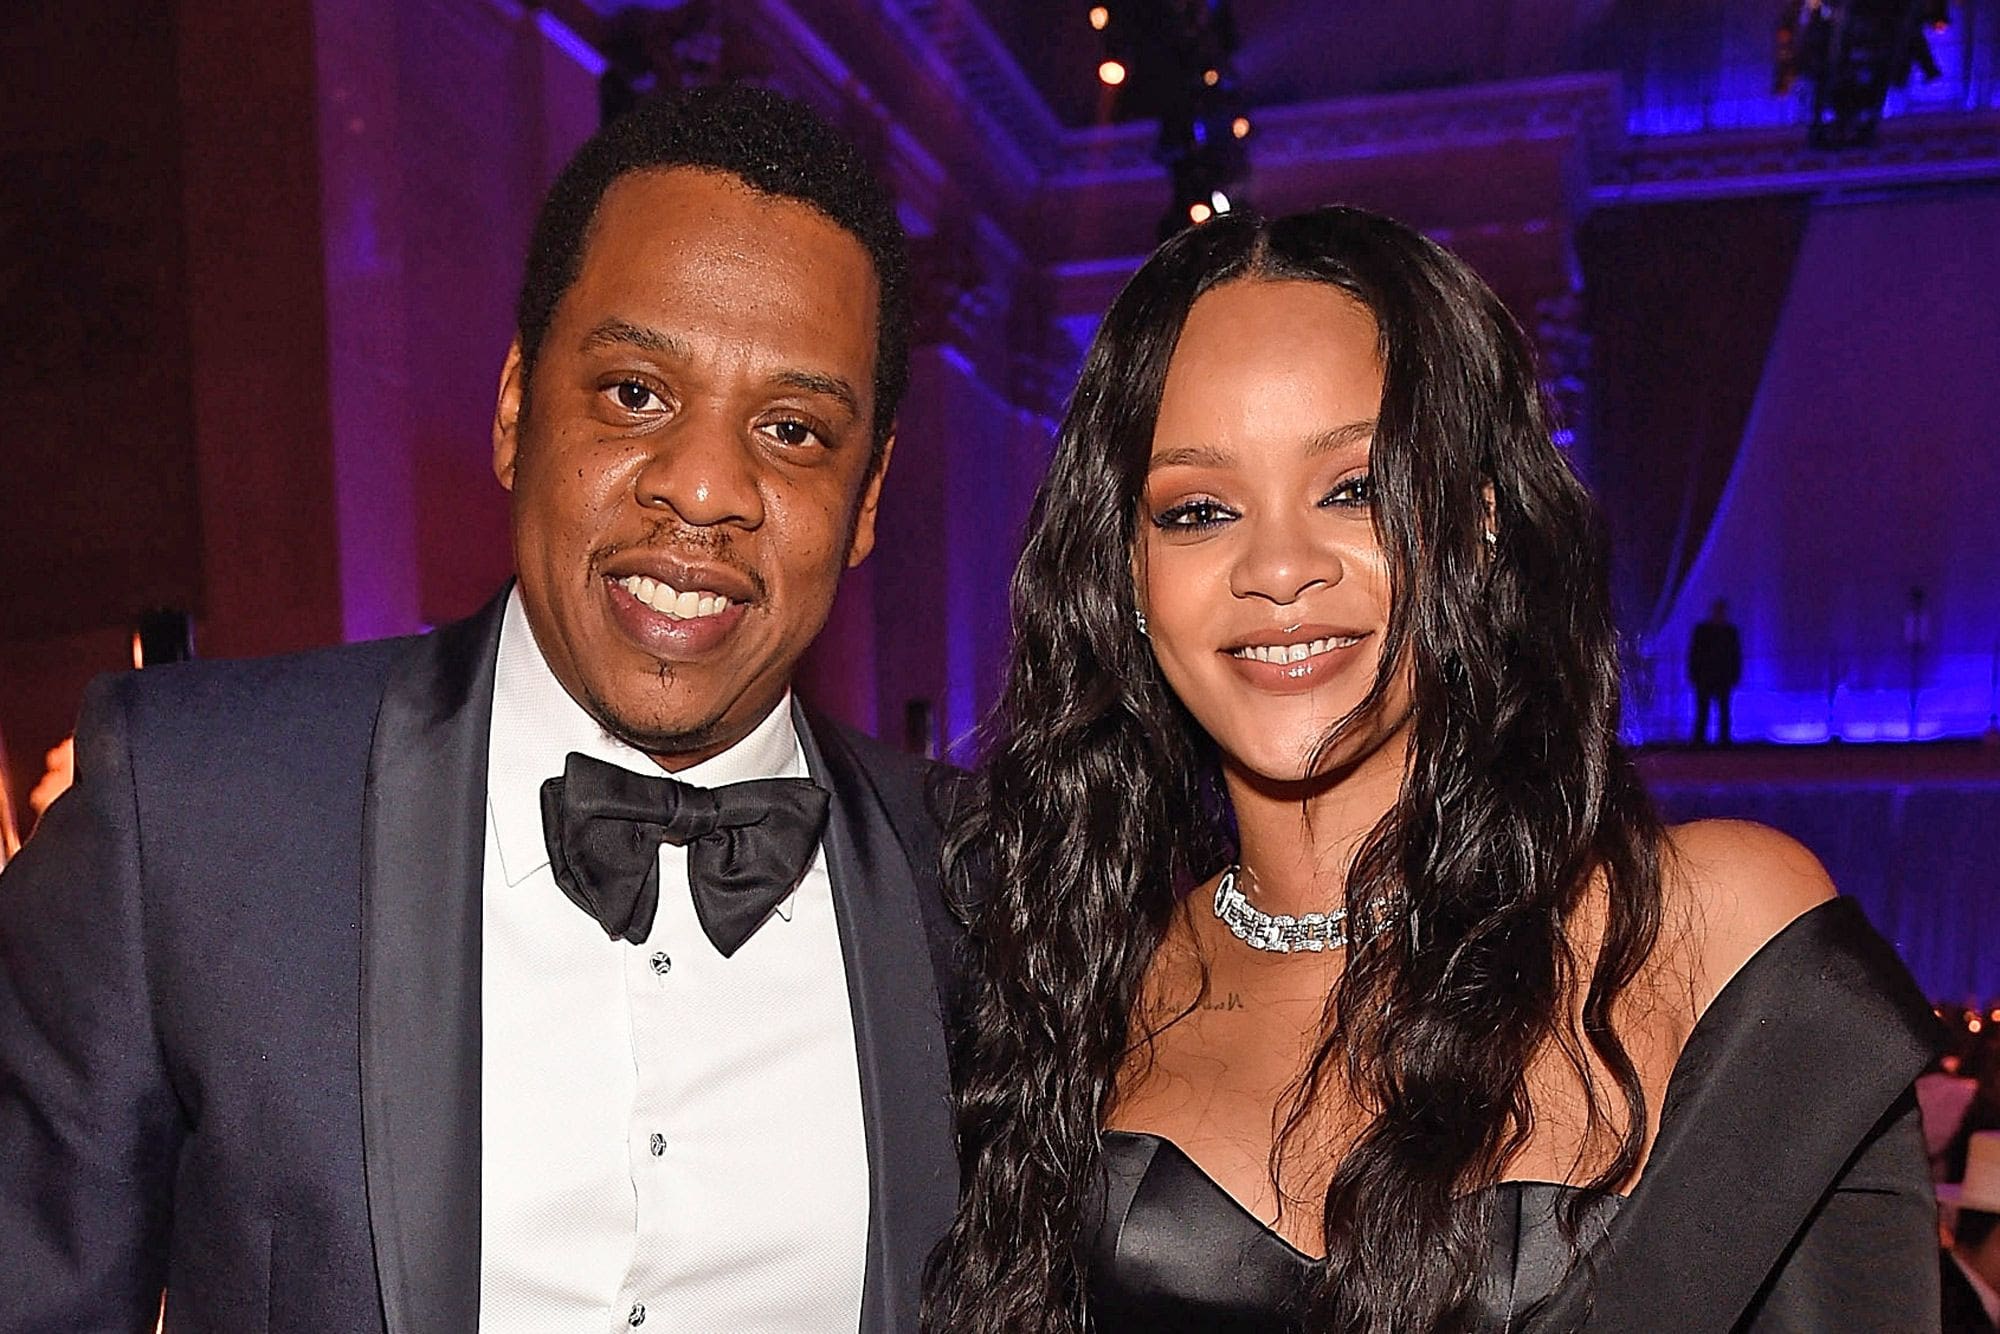 Jay-Z And Rihanna's Founations Donate $2 Million For Covid-19 Relief Efforts